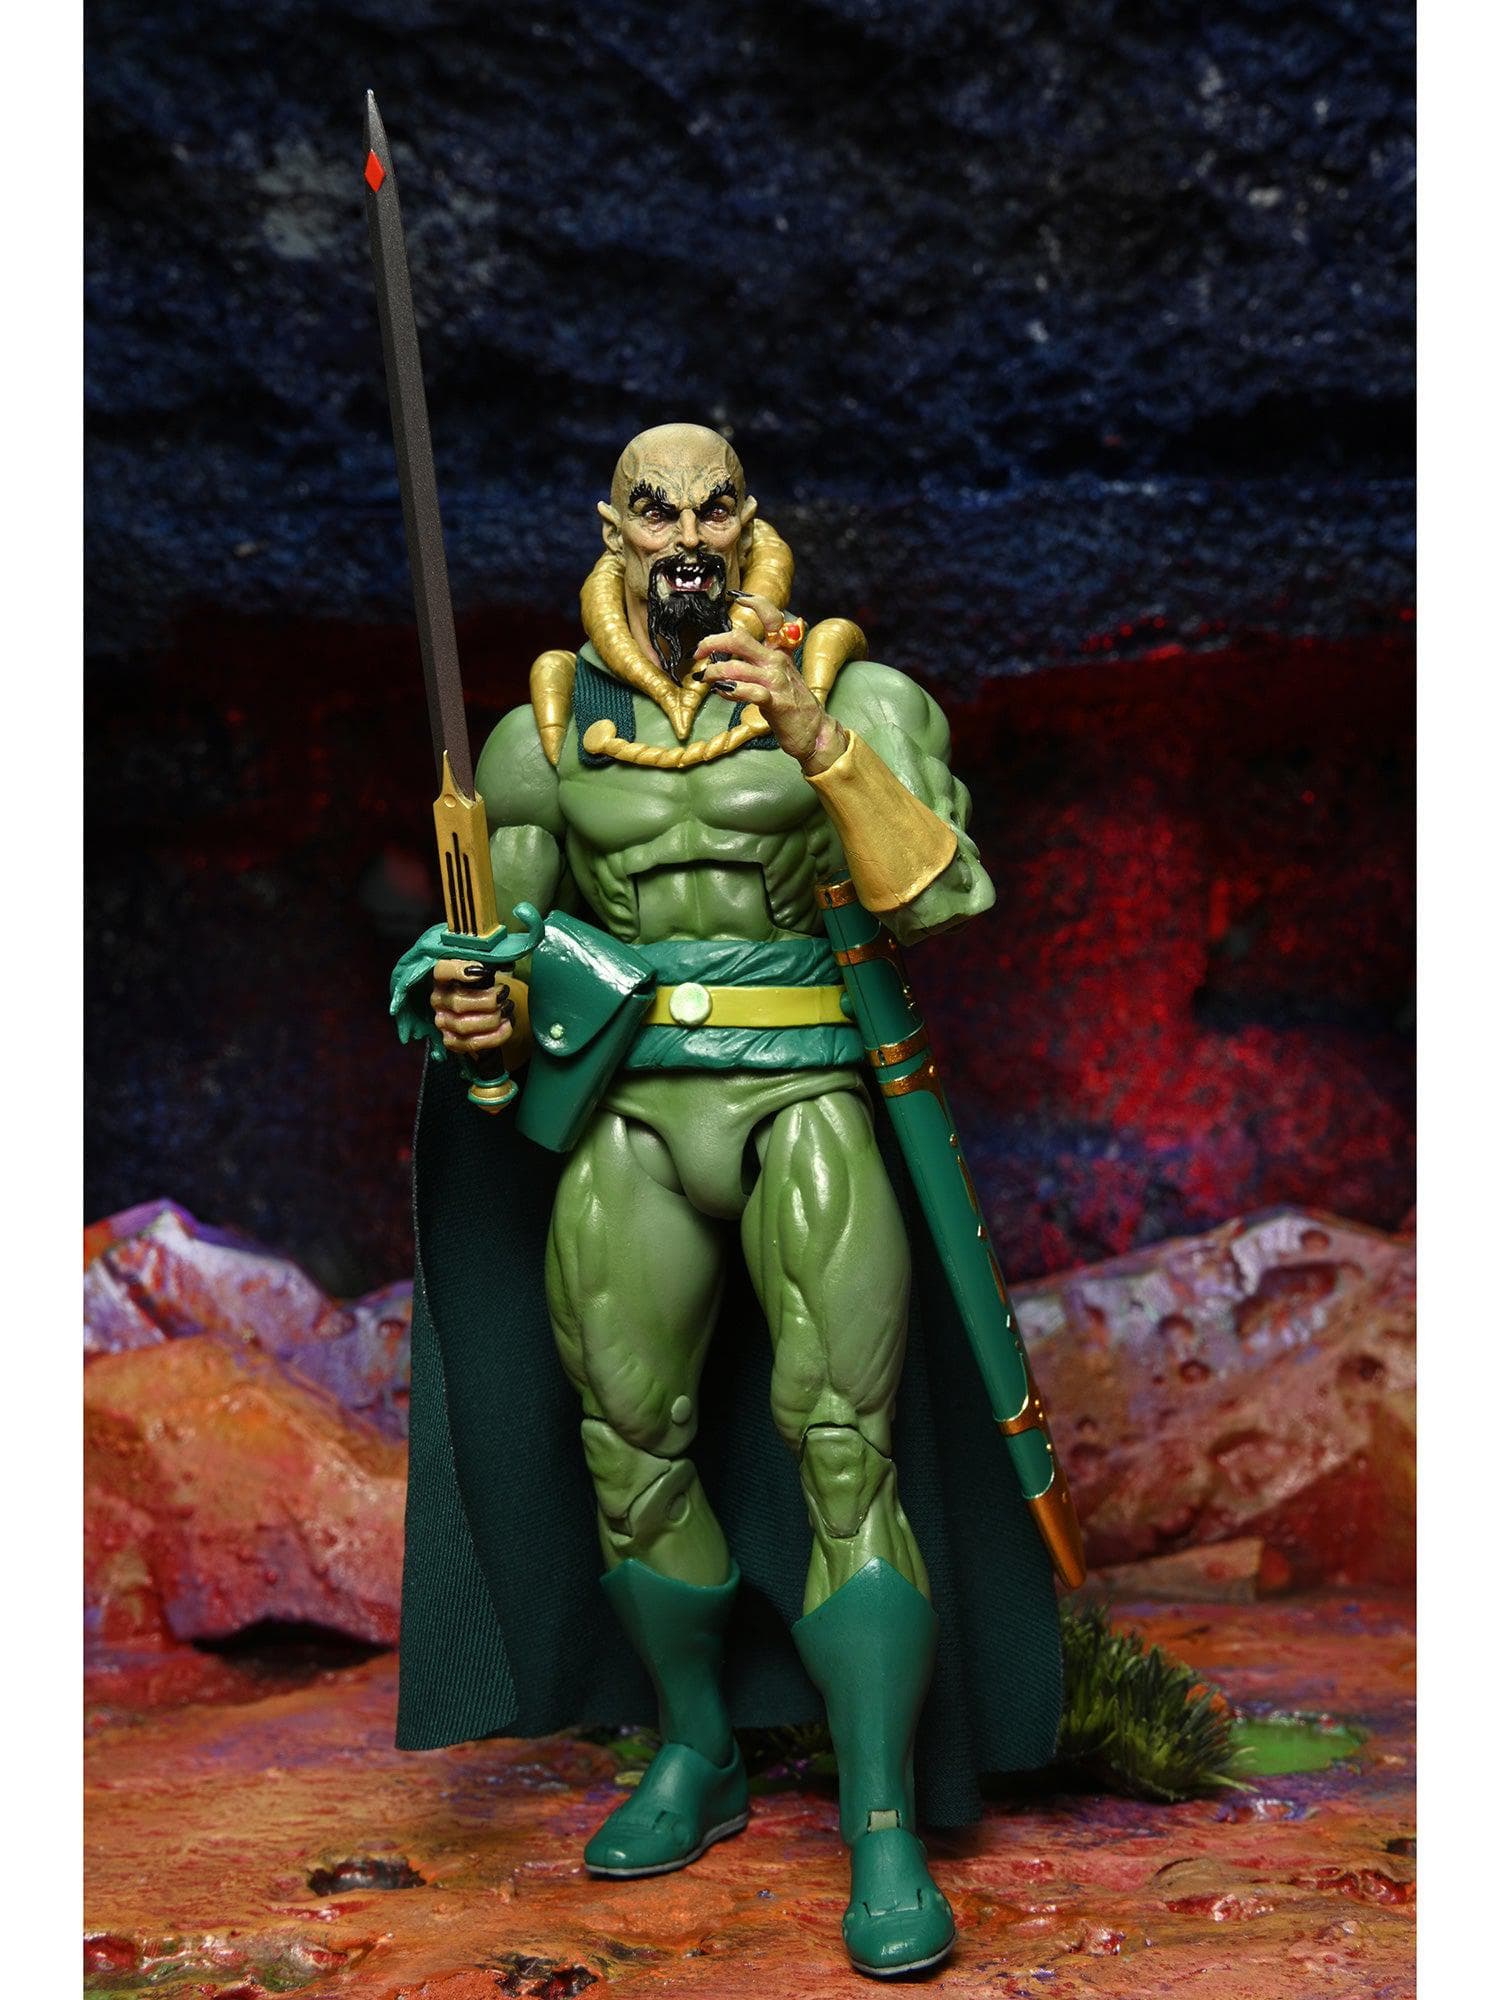 NECA - King Features - 7" Scale Action Figure - Original Superheroes Series Ming the Merciless - costumes.com